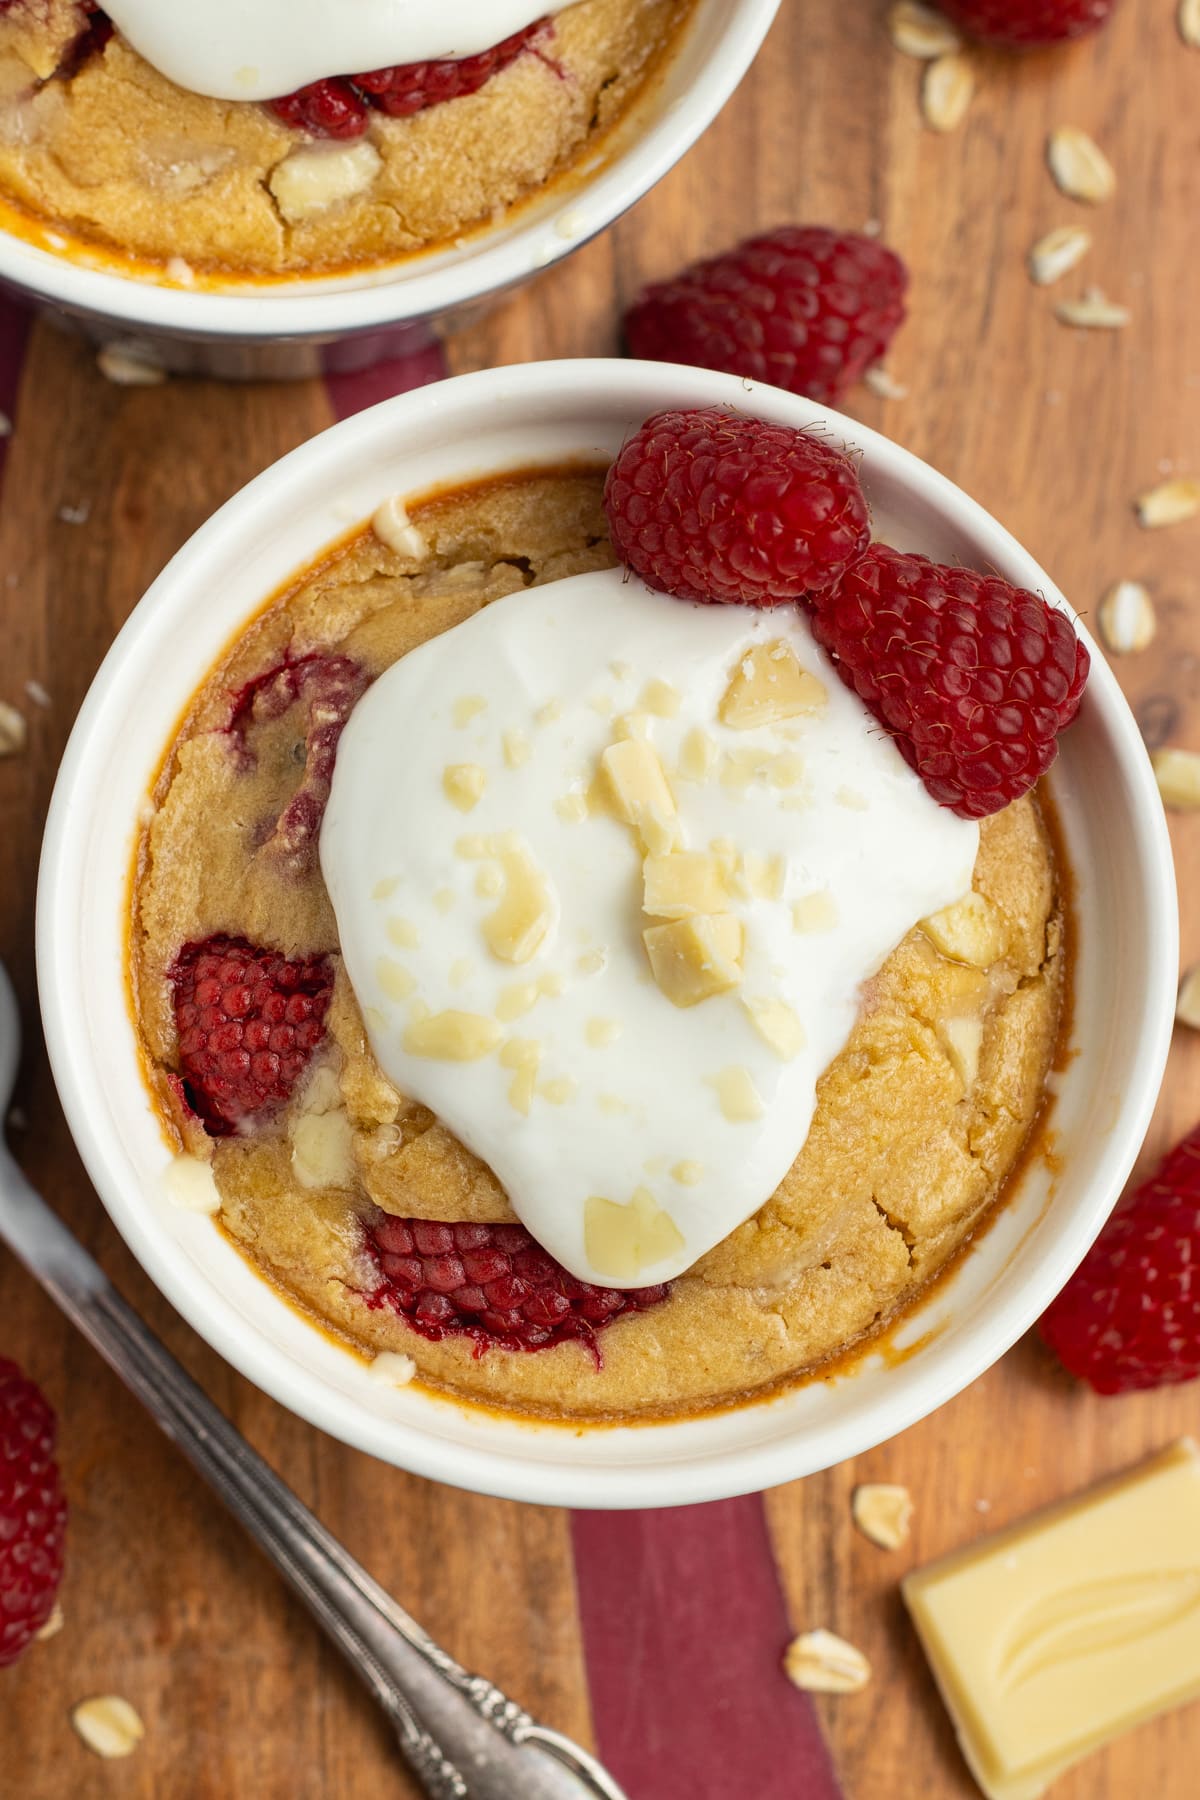 This is a picture of the white chocolate raspberry baked oats ready to eat with yogurt on top.